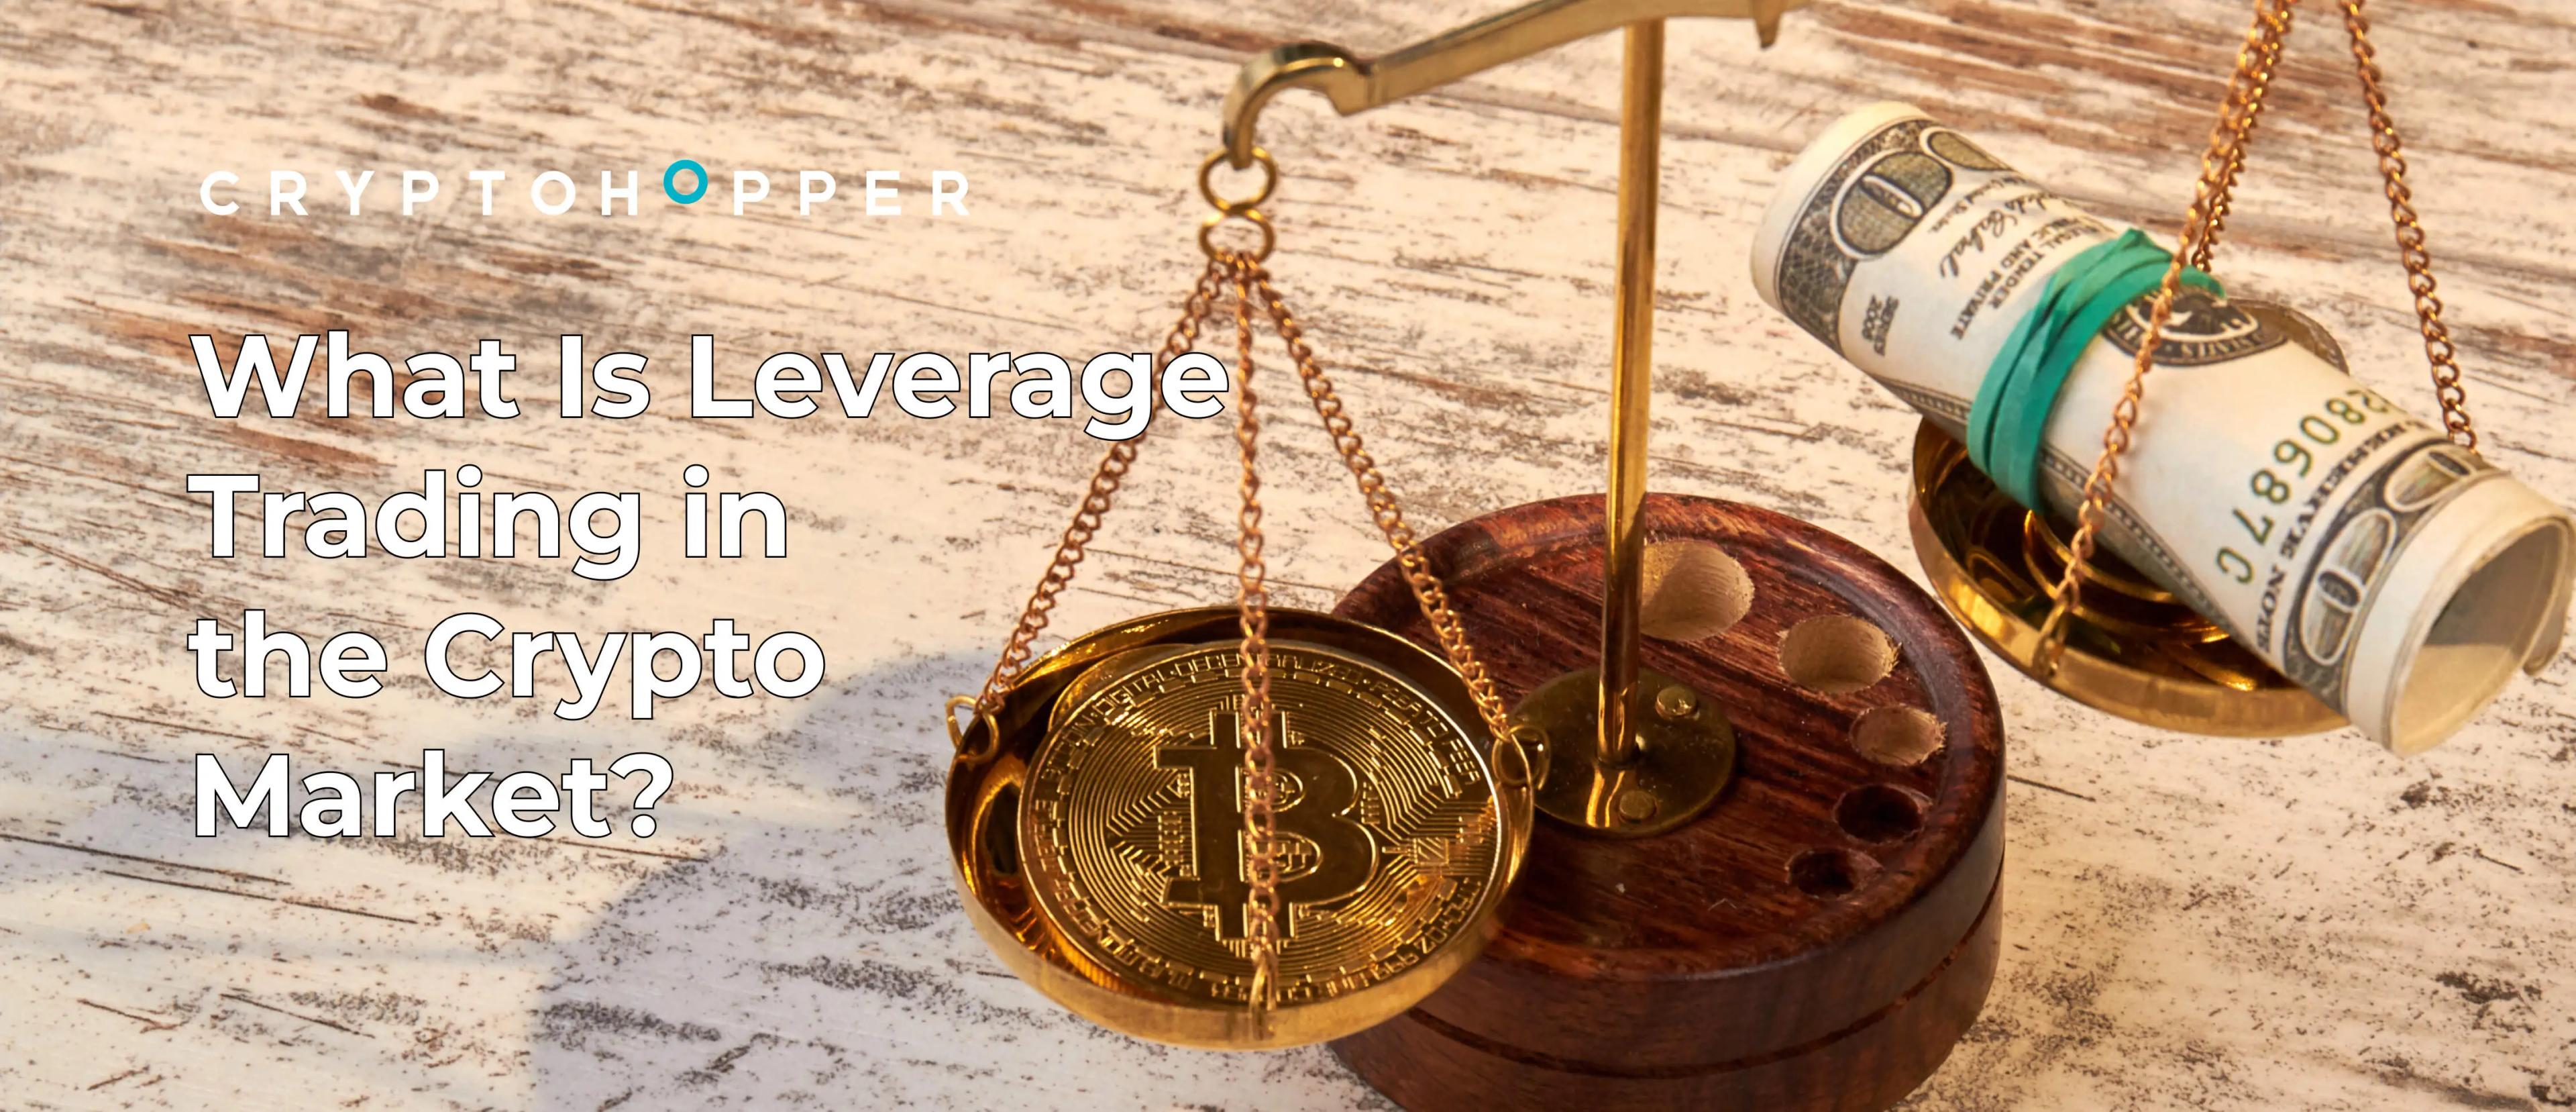 What Is Leverage Trading in the Crypto Market?